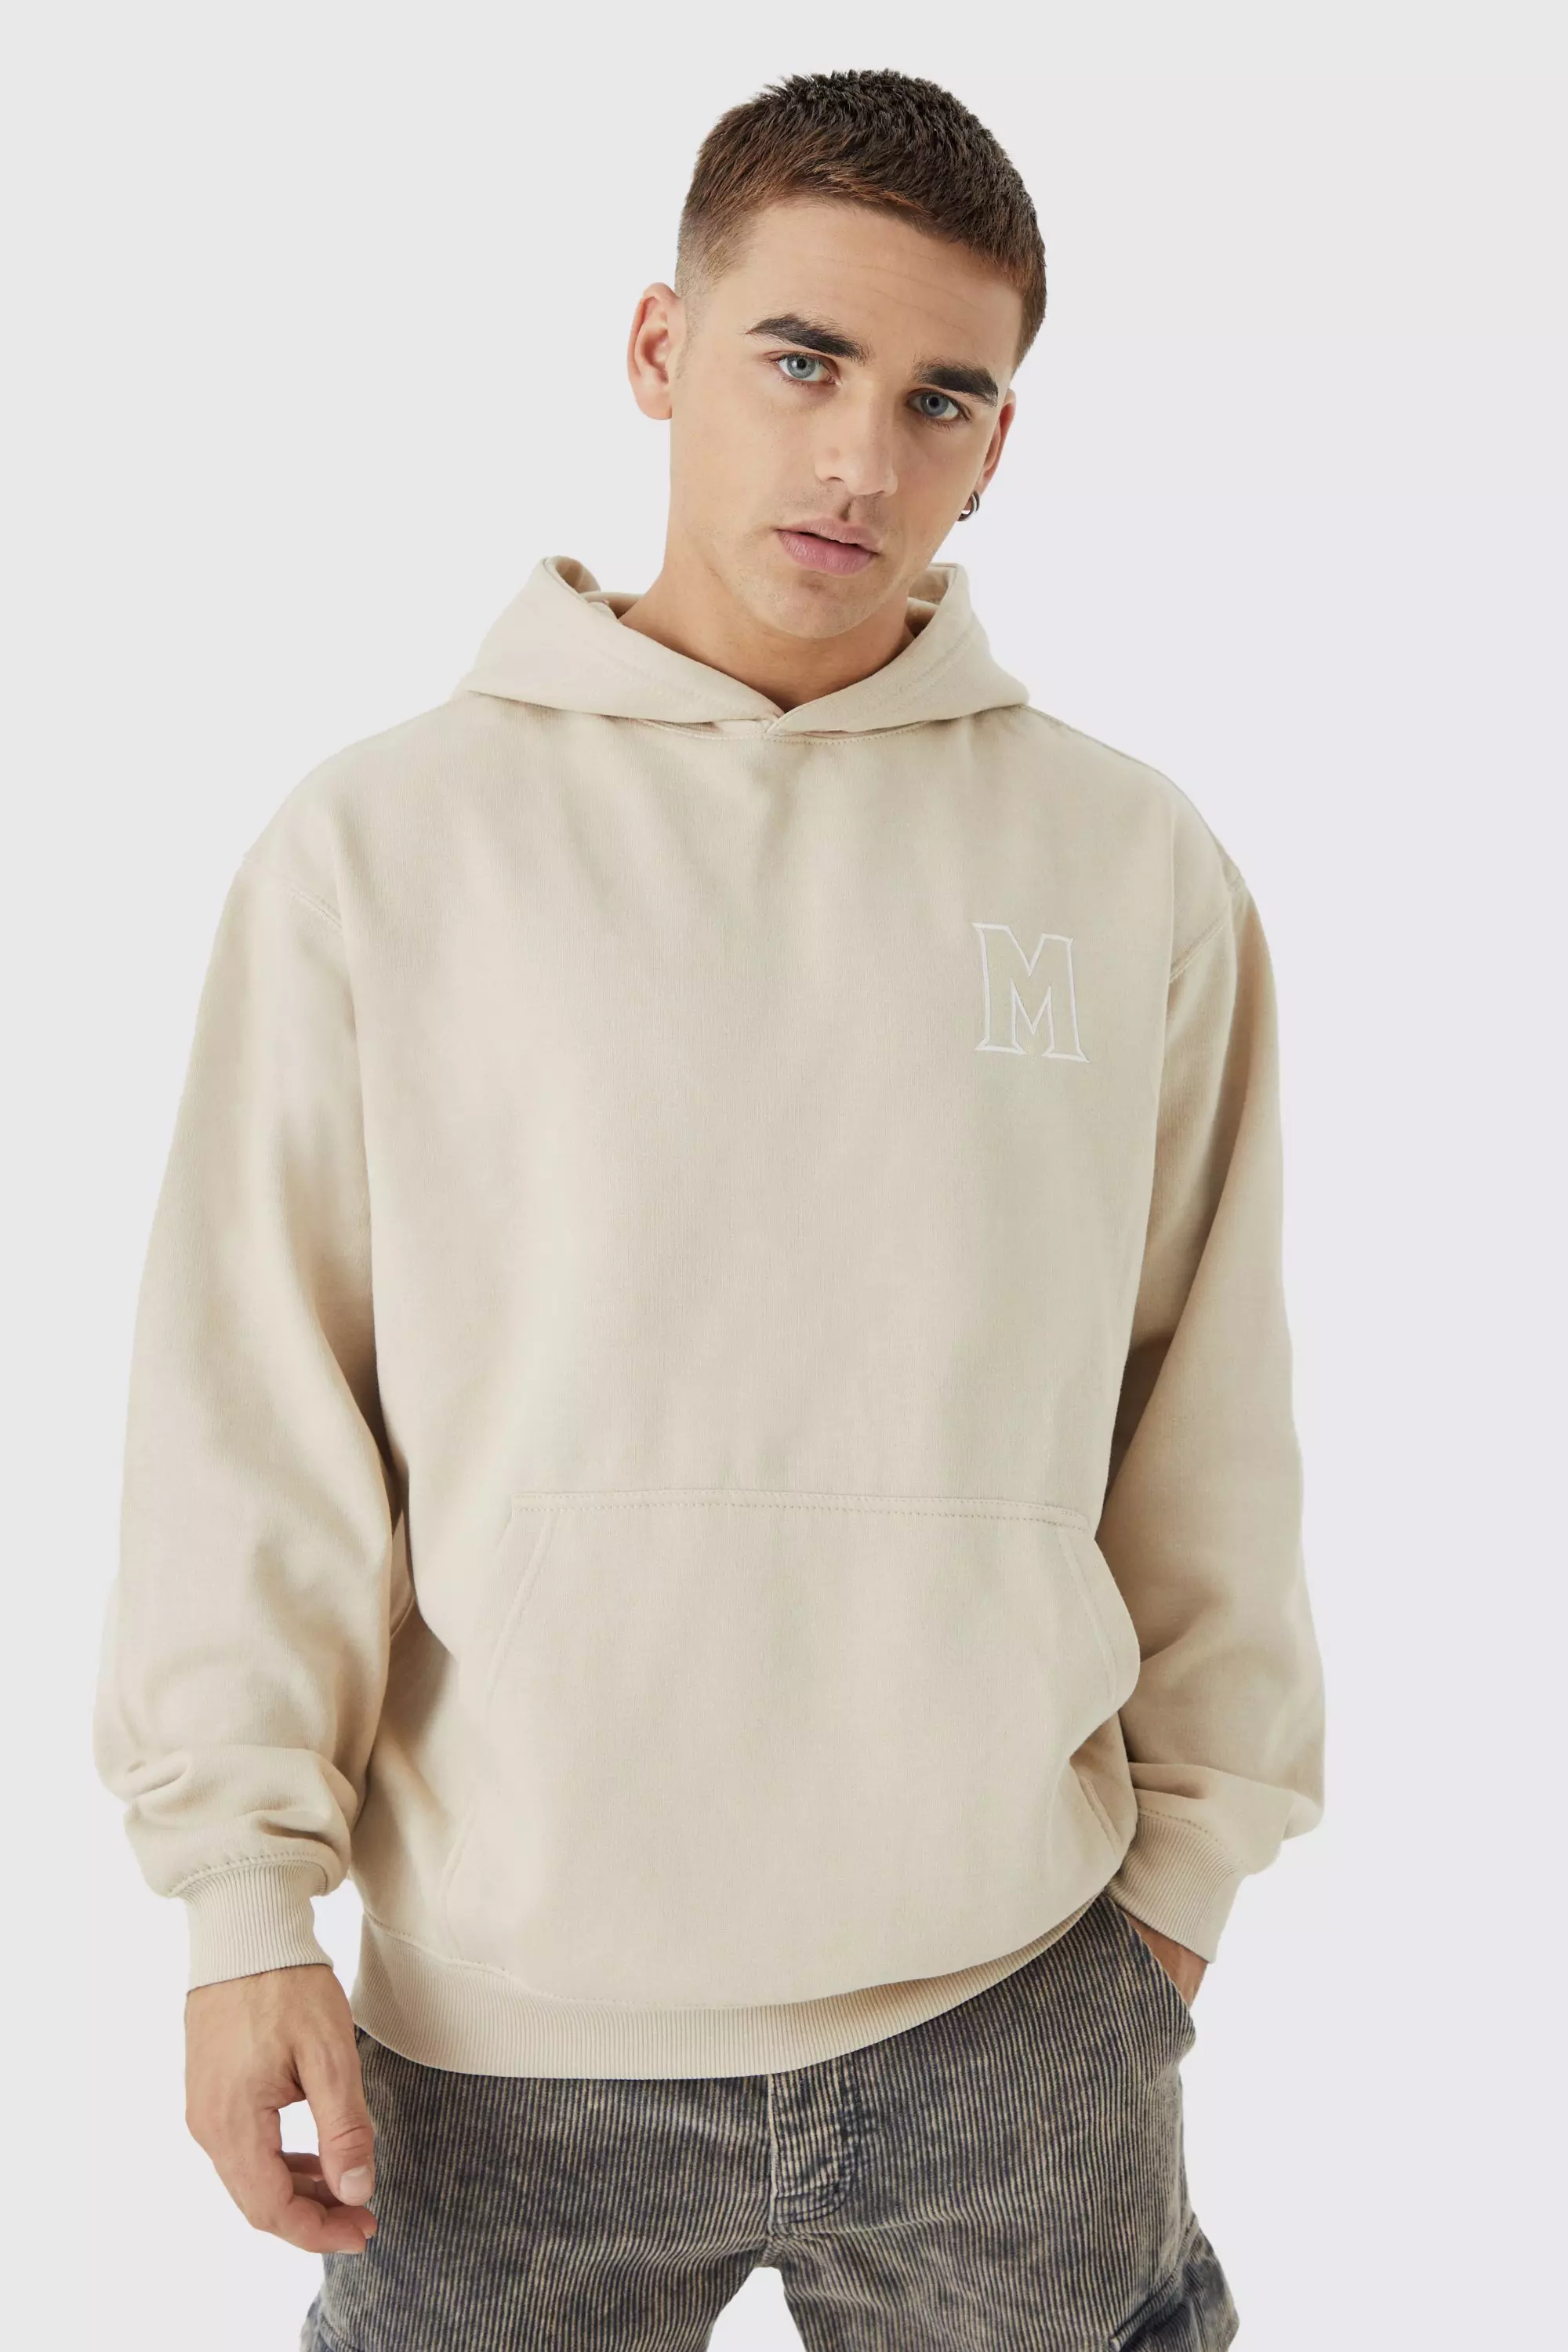 Sand Beige Oversized M Embroidered Hoodie